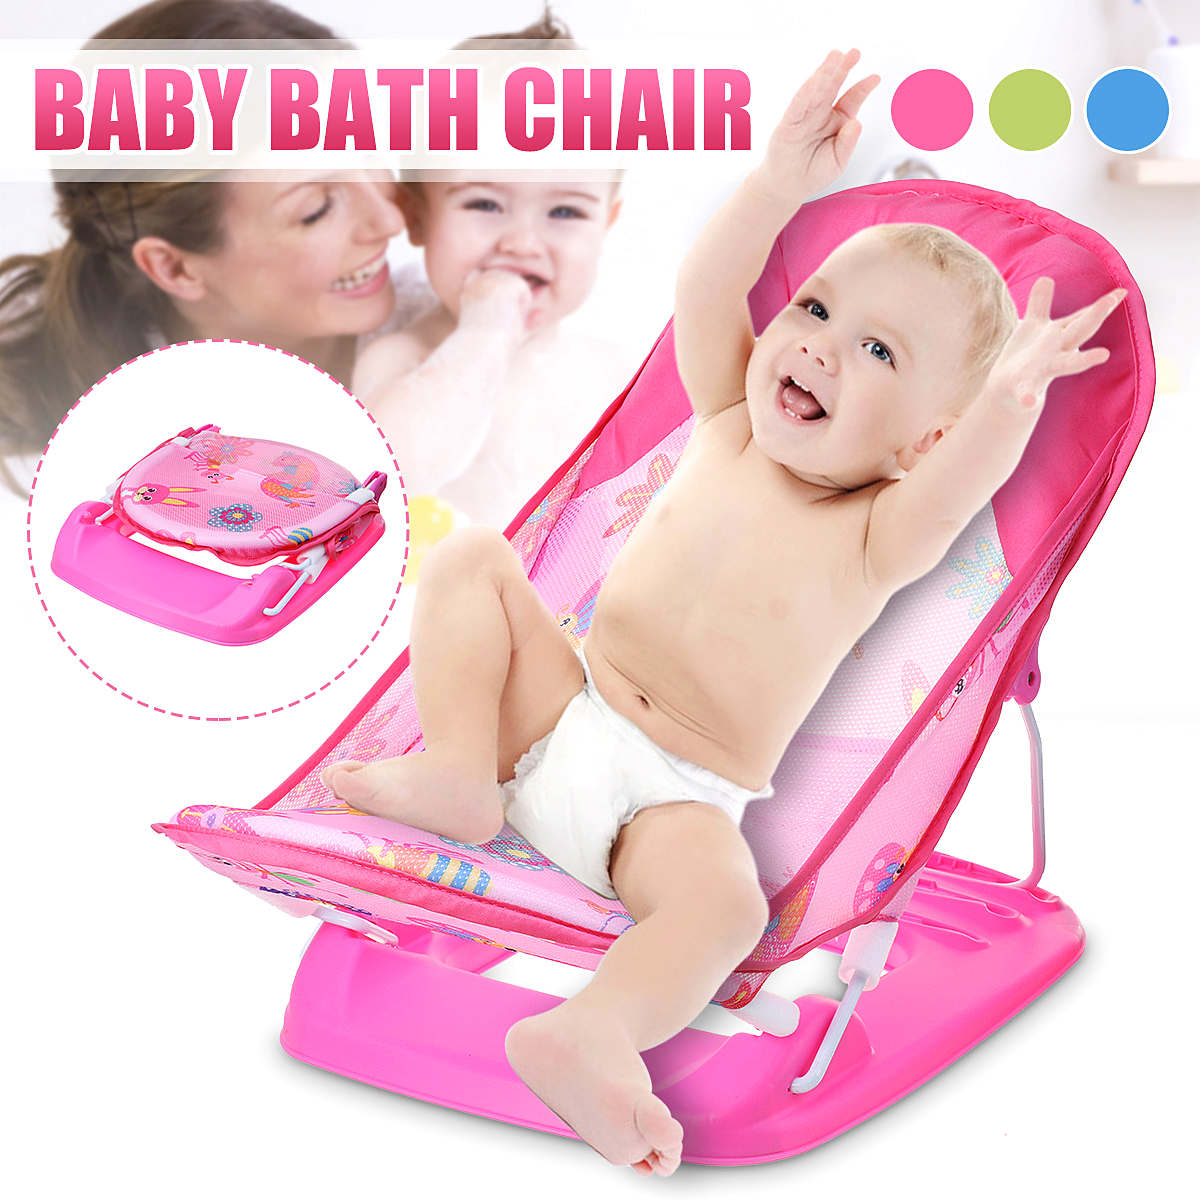 Baby-Swing-Seat-Folding-Portable-Baby-Bath-Shower-Chair-for-012-Month-Baby-1878834-1